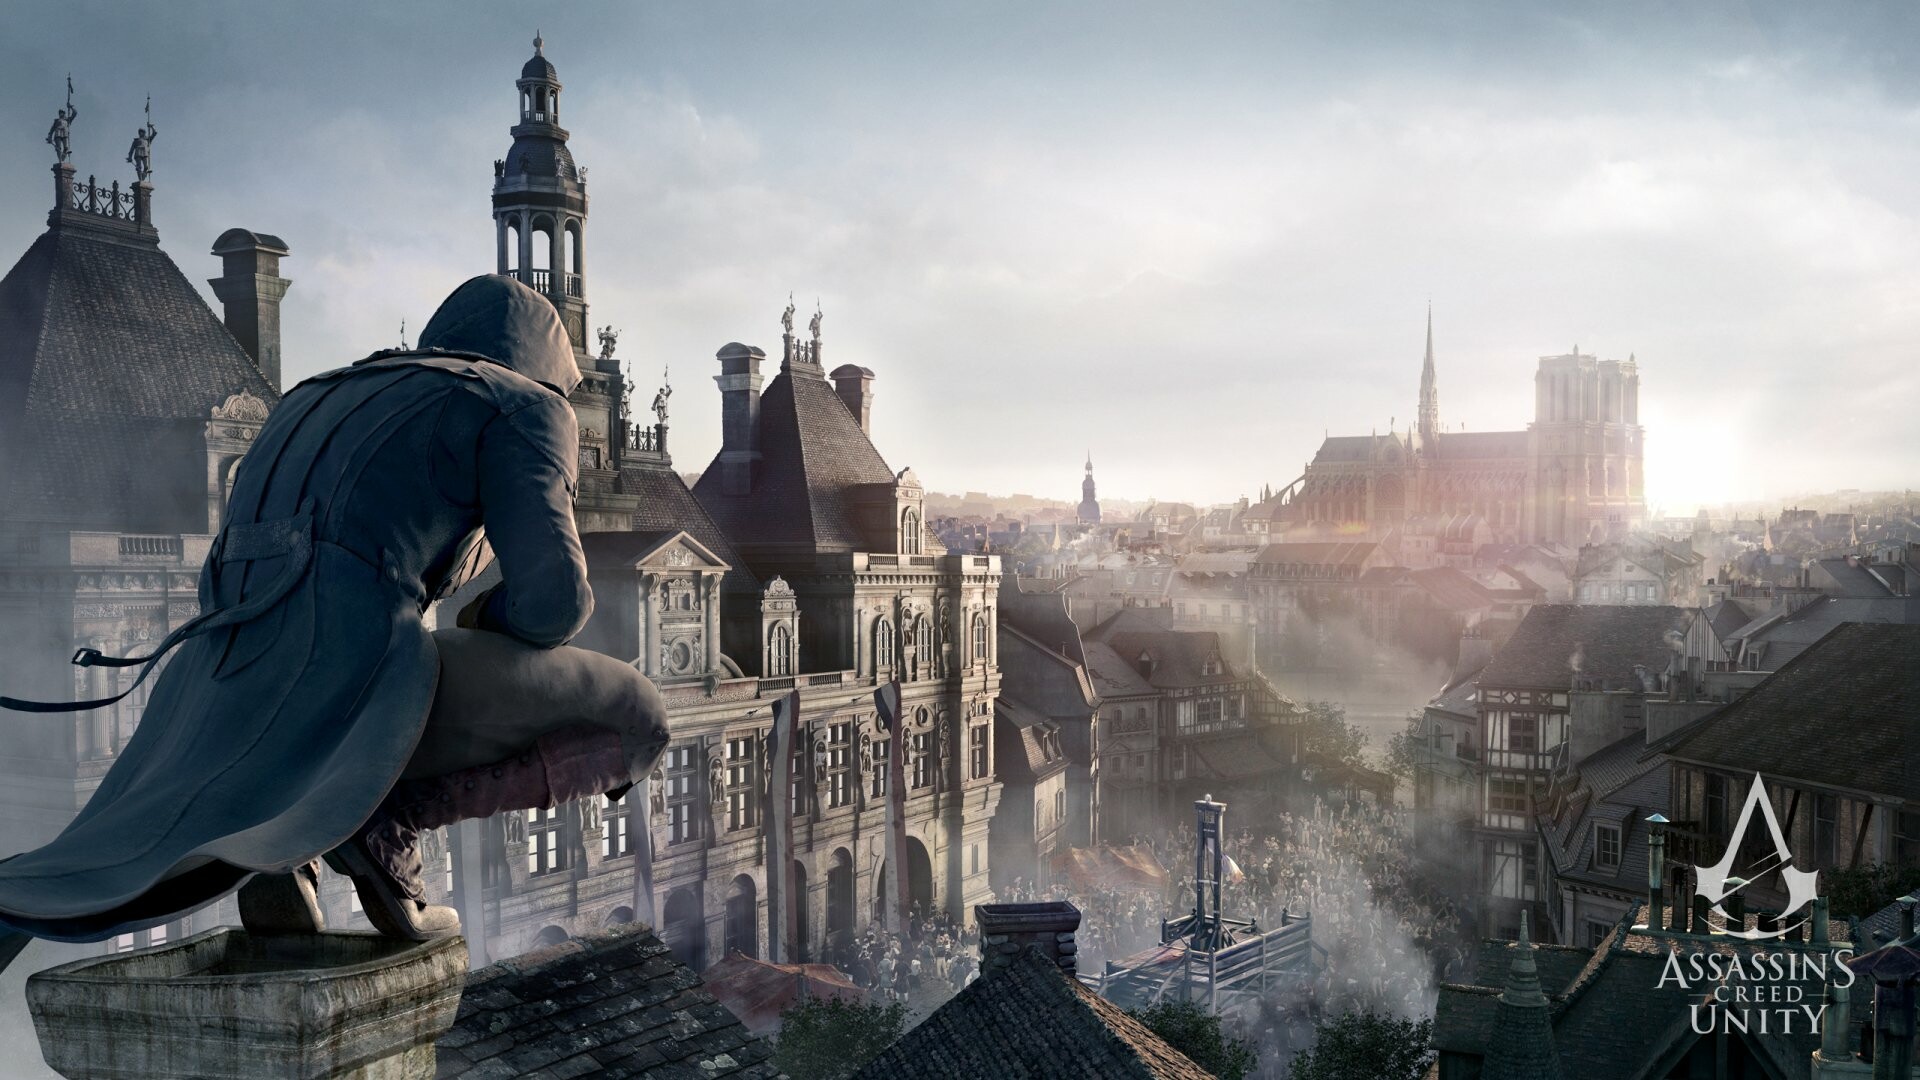 Assassin's Creed: Unity, A 2014 game, A sequel to 2013's Black Flag. 1920x1080 Full HD Wallpaper.